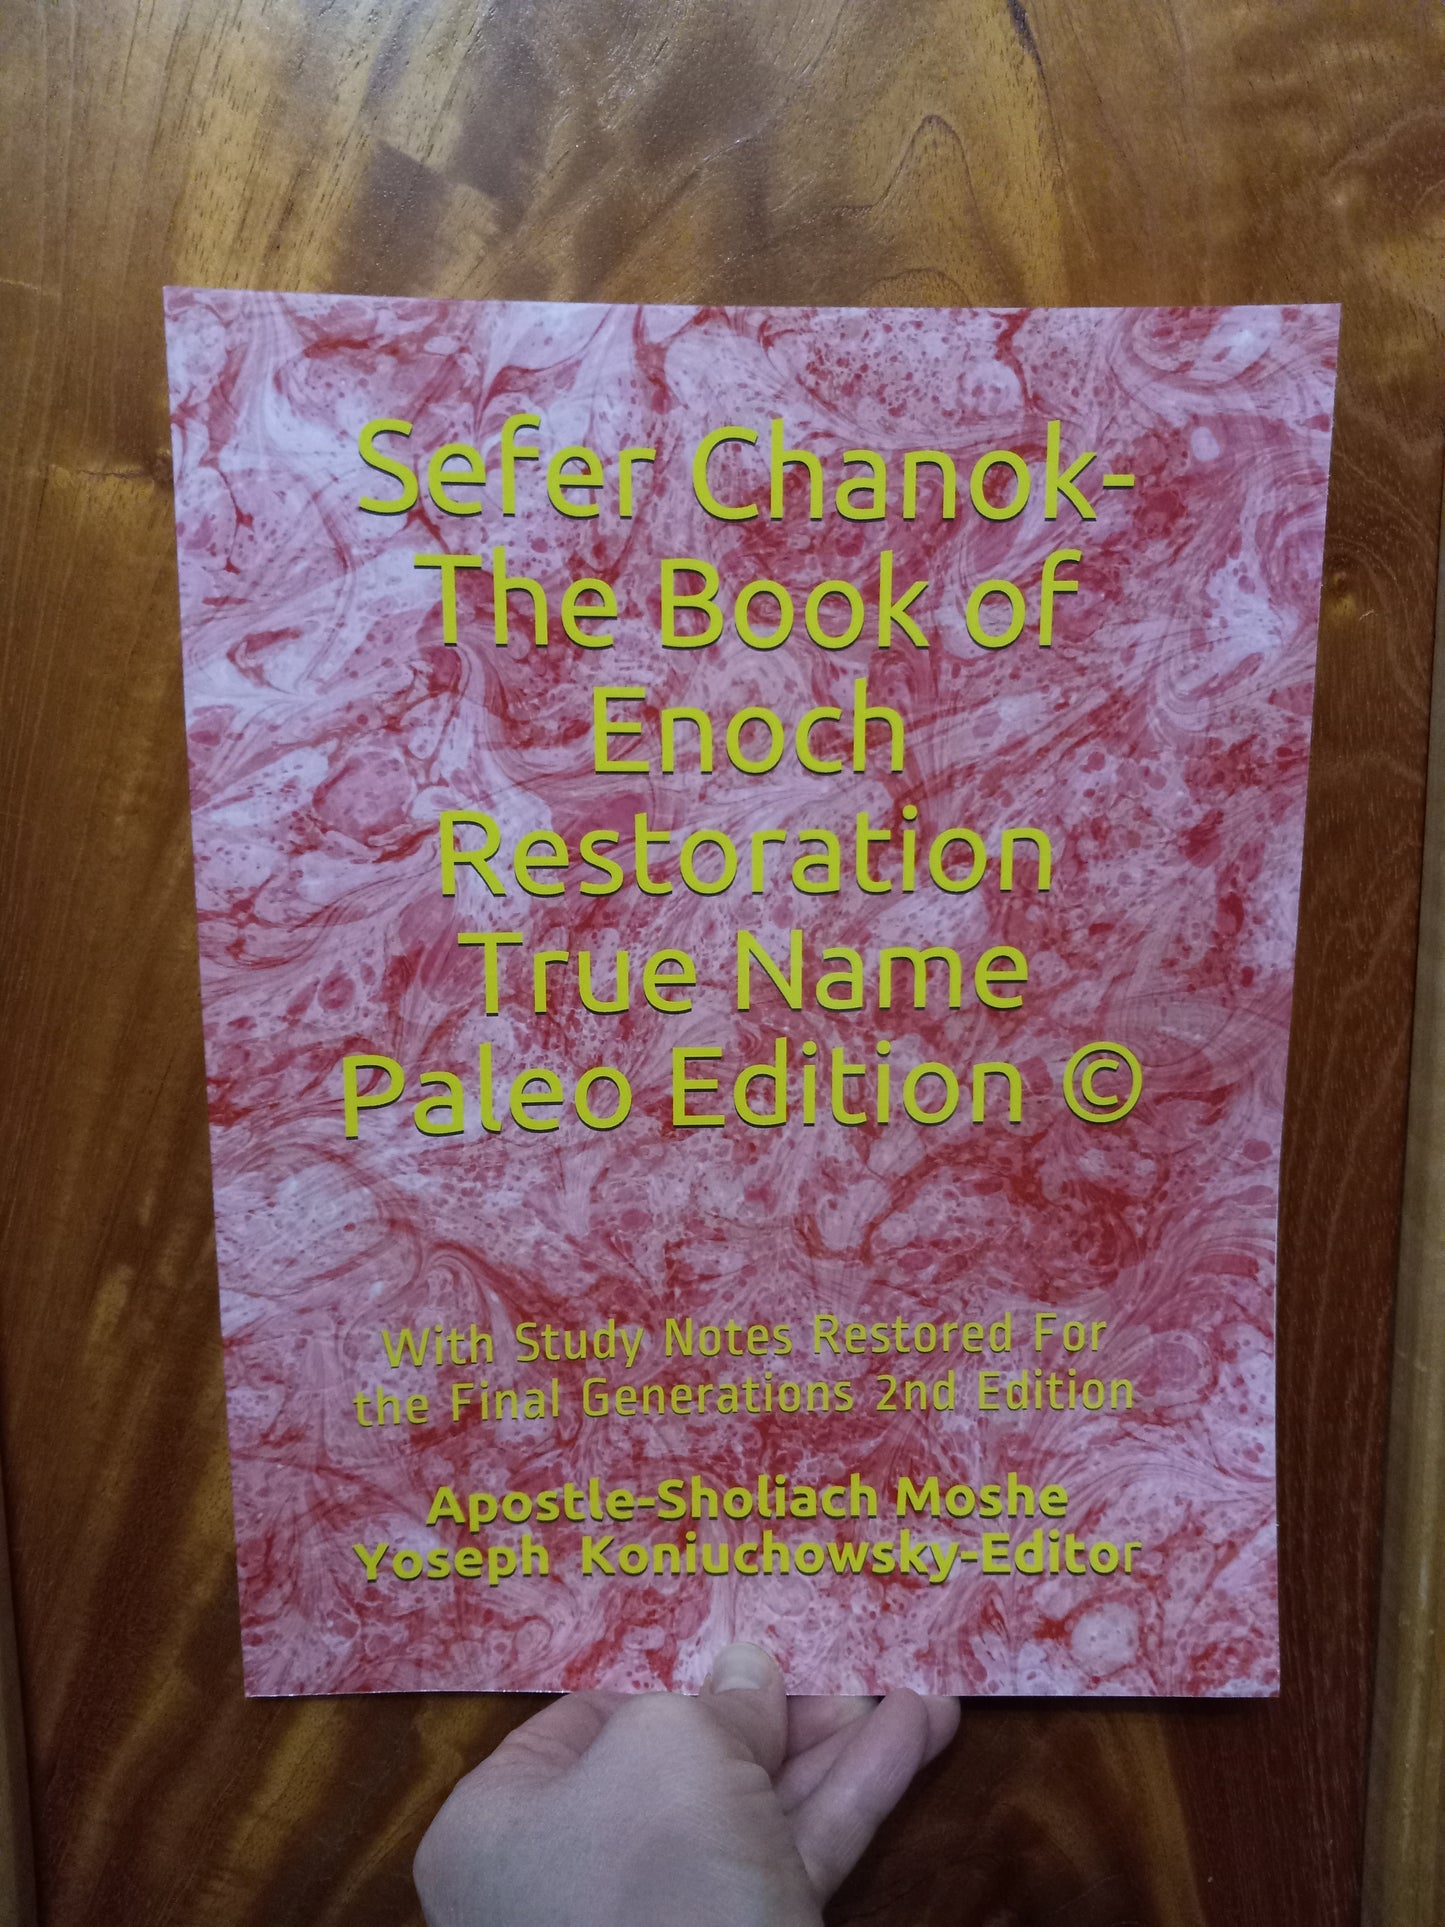 Sefer Chanok-The Book of Enoch Restoration True Name Paleo Edition ©: With Study Notes Restored For the Final Generations 2nd Edition Paperback